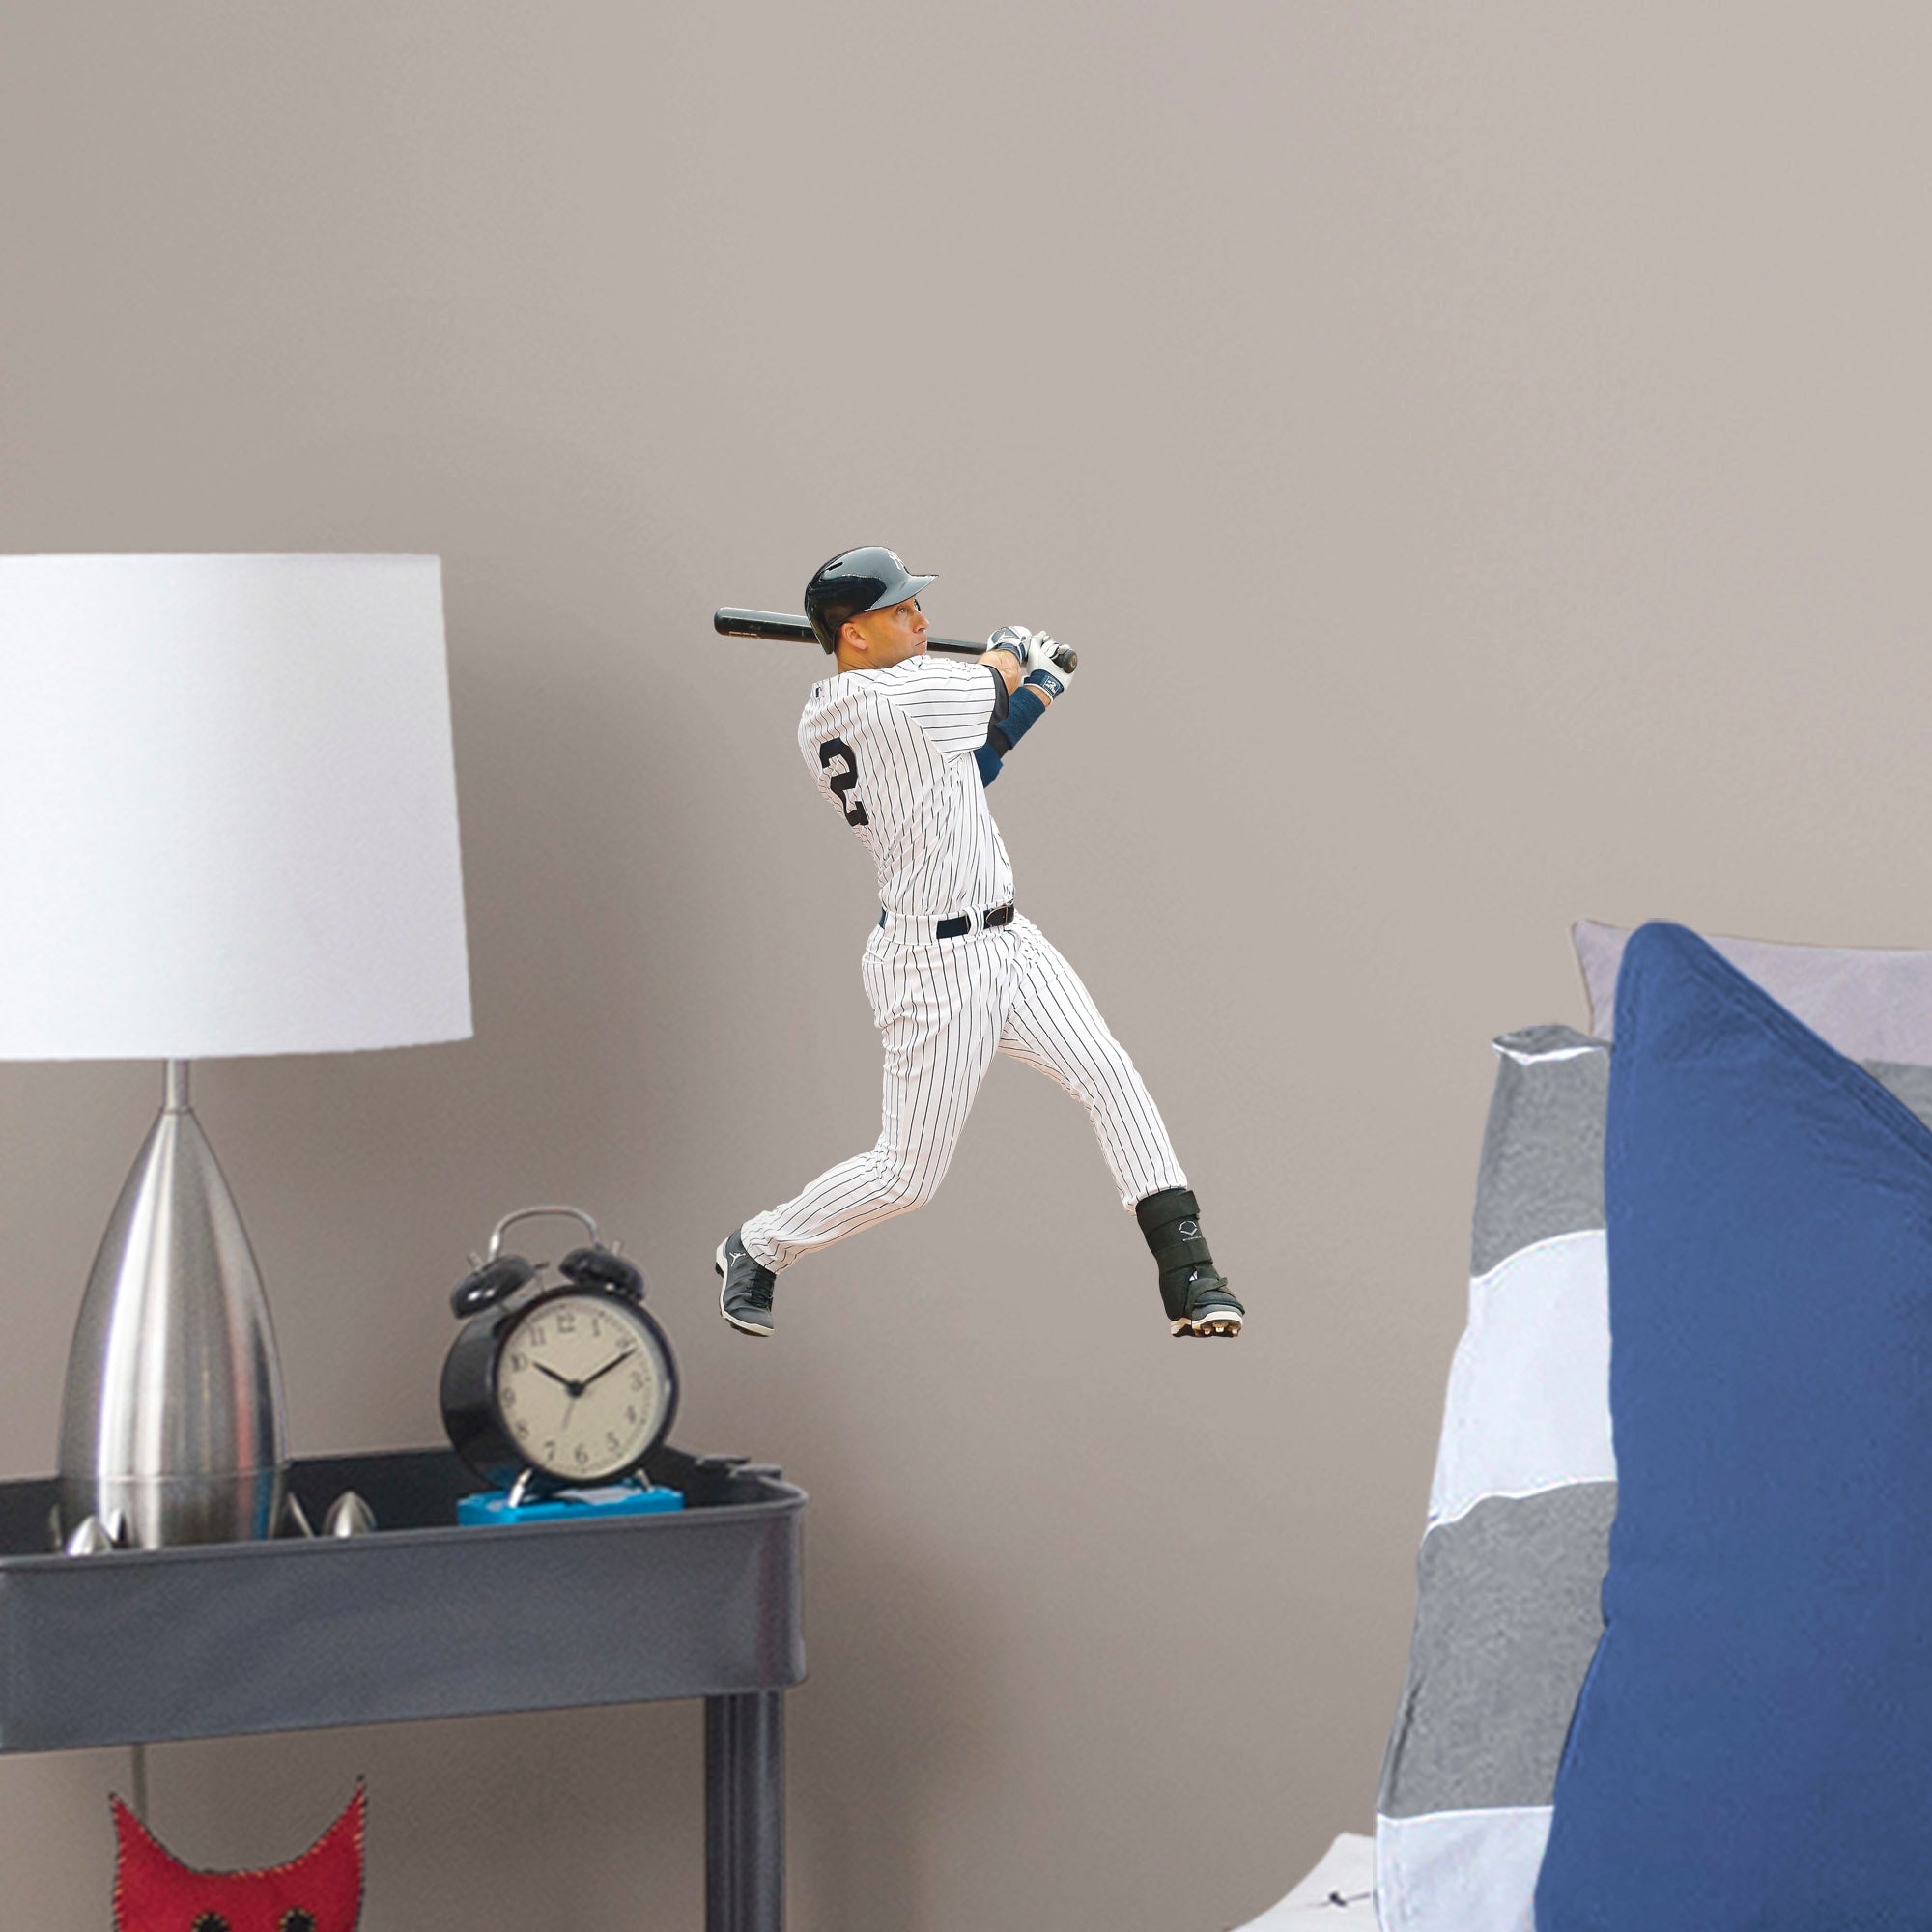 Derek Jeter for New York Yankees: Legacy - Officially Licensed MLB Removable Wall Decal Large by Fathead | Vinyl